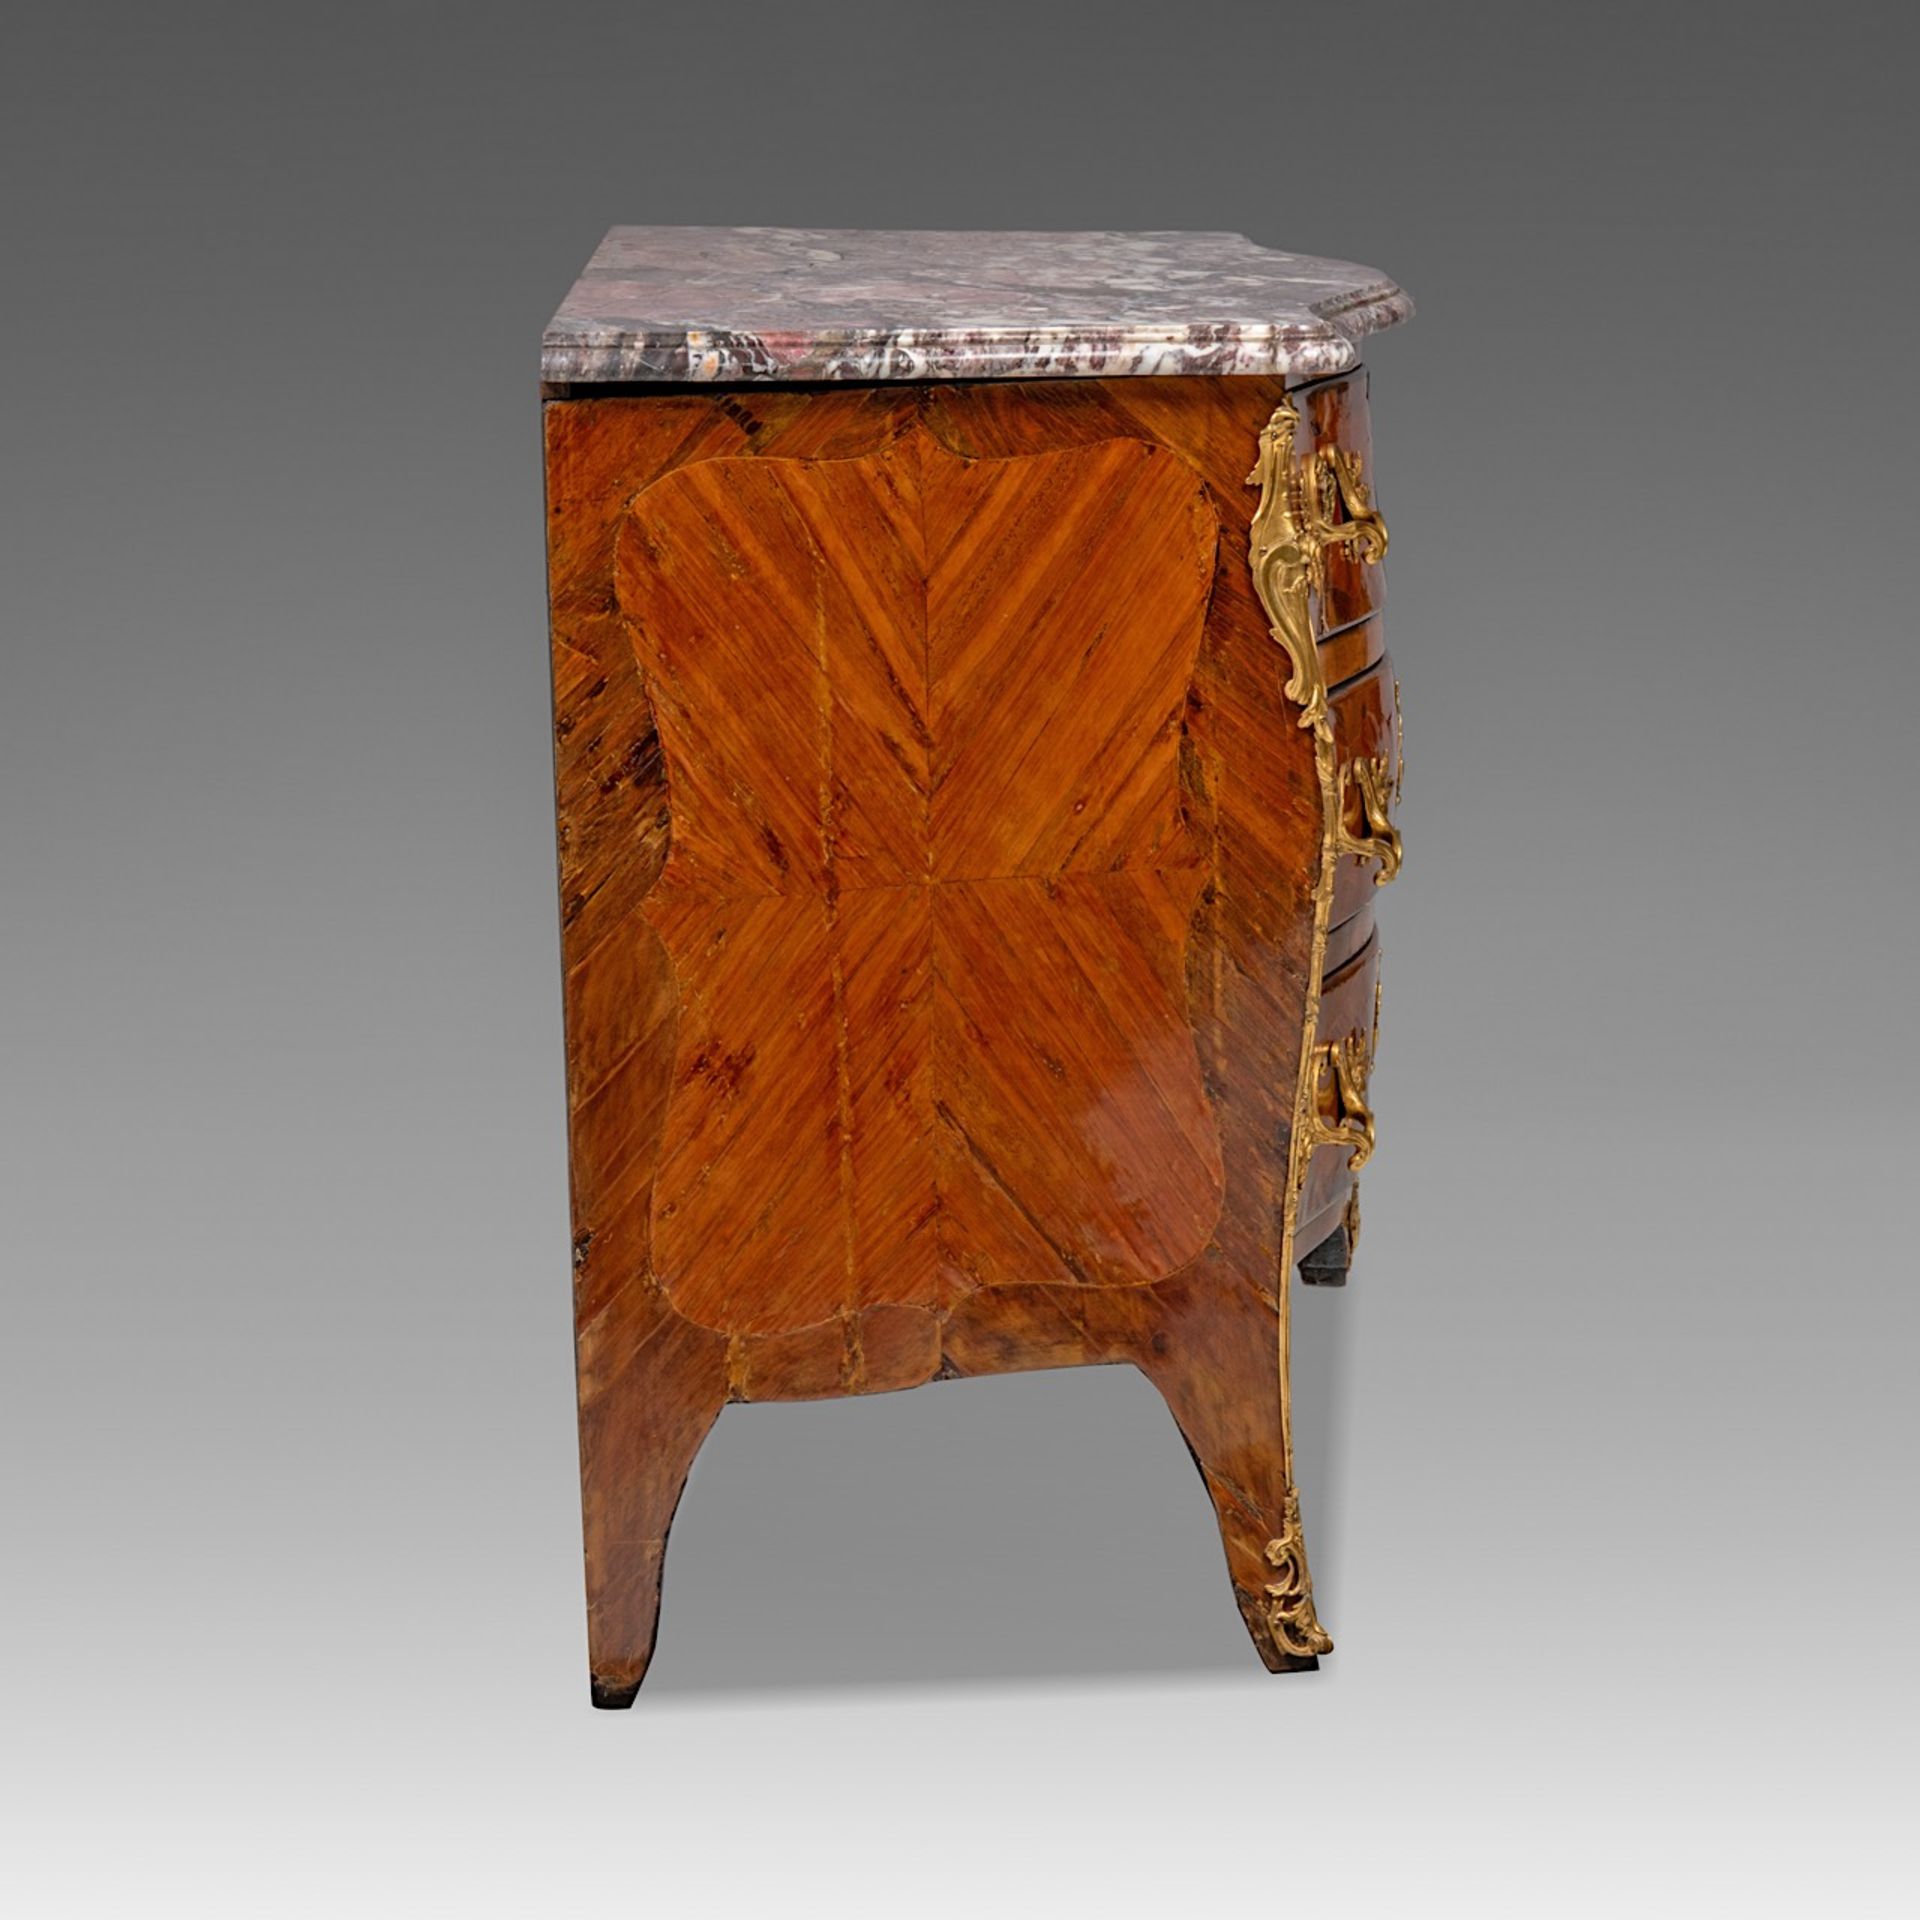 A commode a la Regence with a marble top and gilt bronze mounts, early 18thC, H 88 - W 128 - D 60 cm - Image 9 of 10